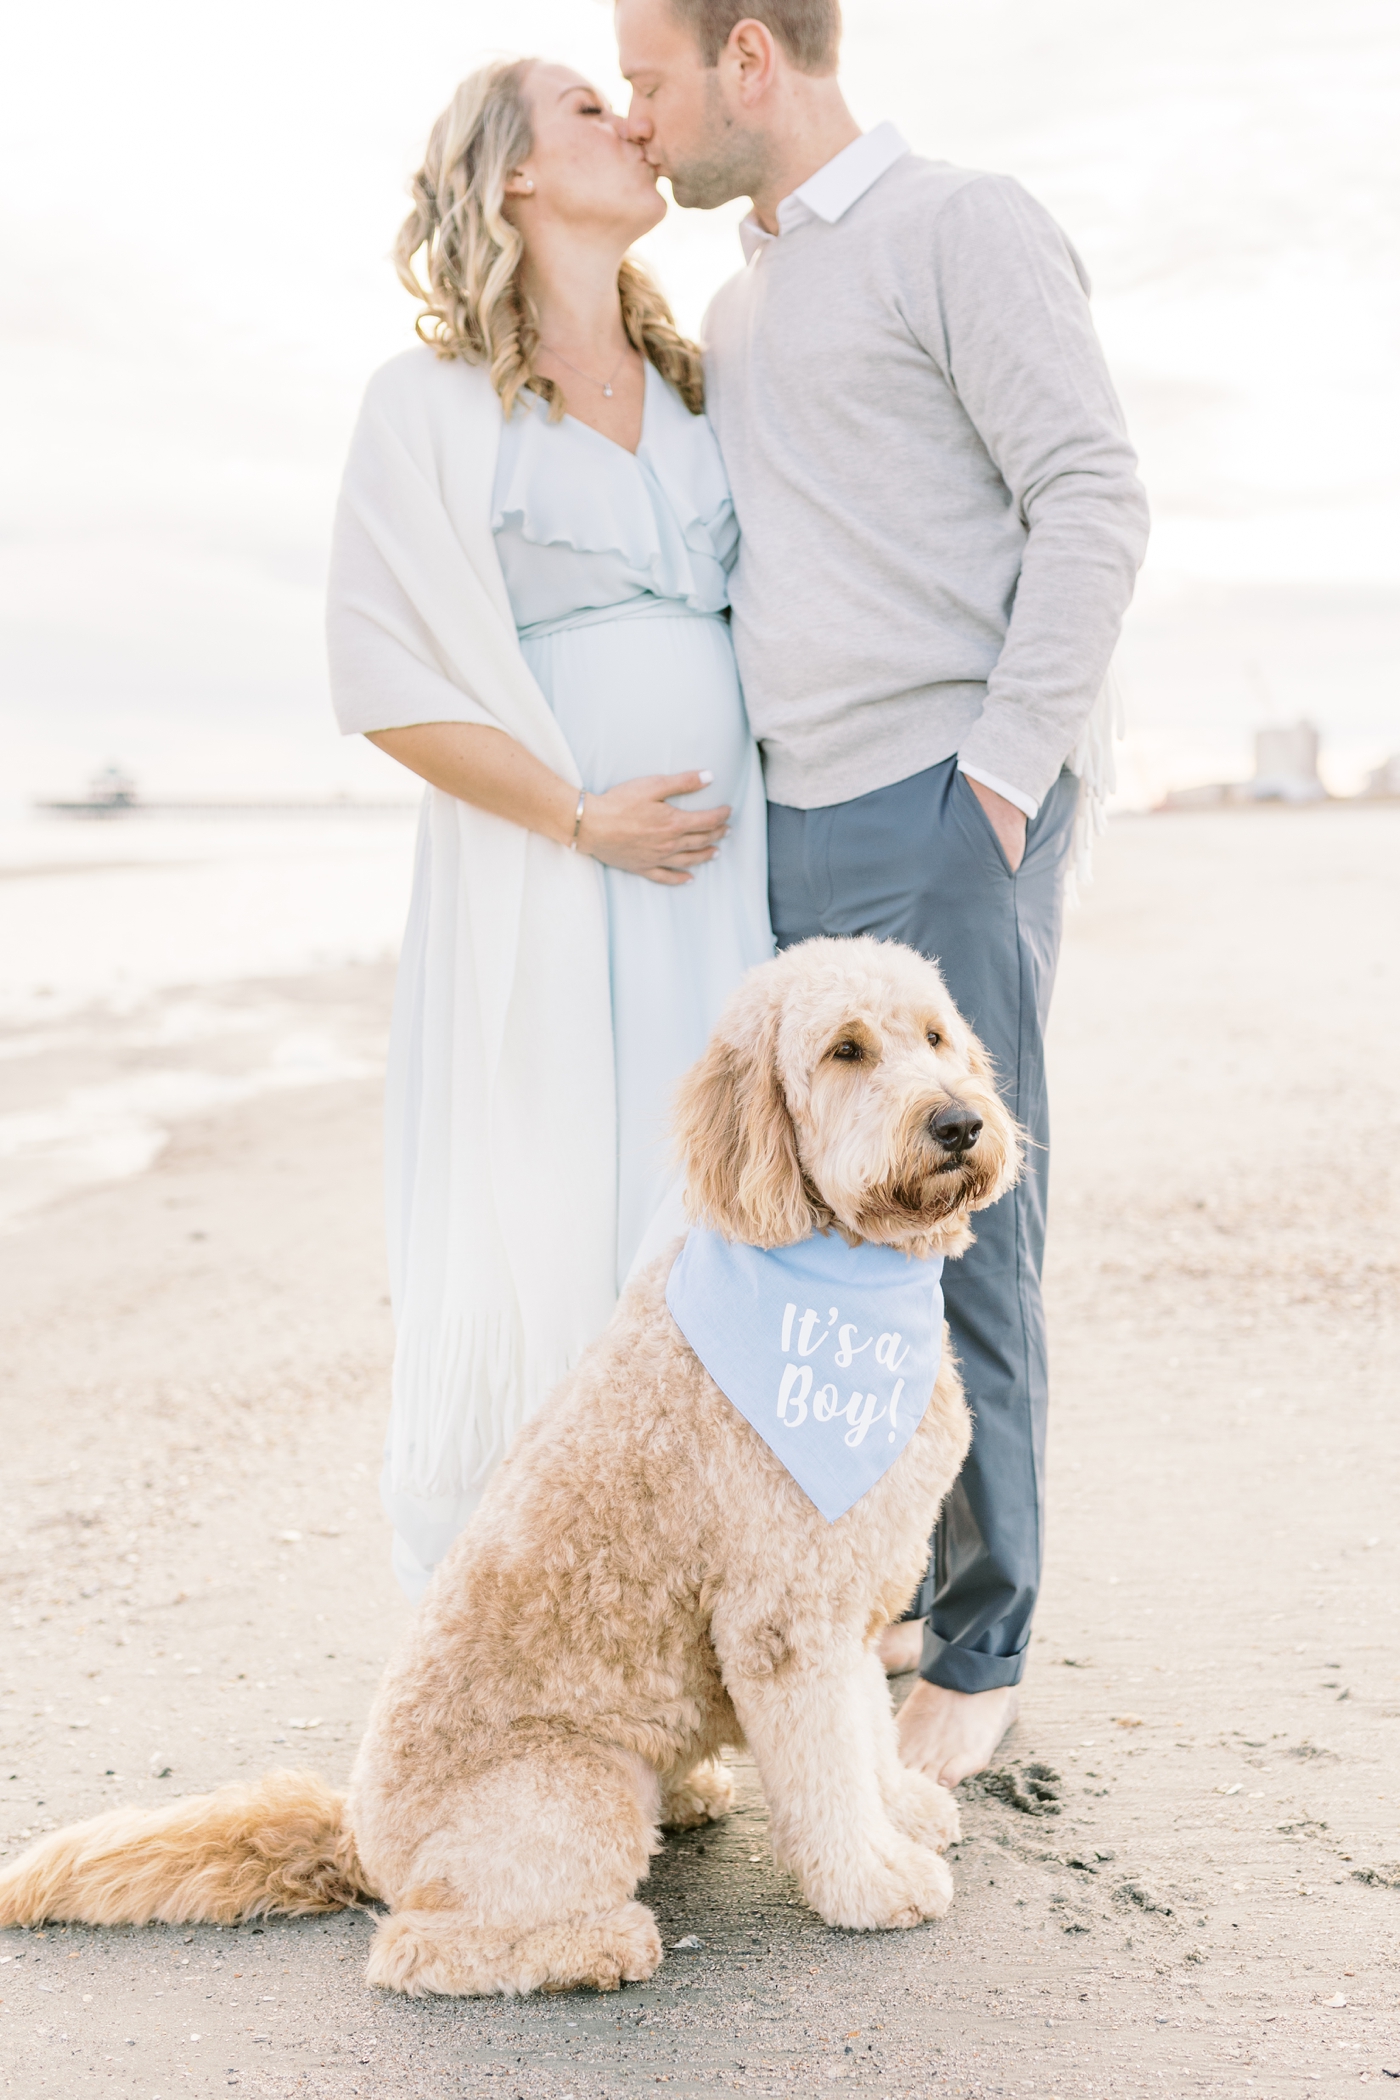 Gender reveal with dog on the beach. Photo by Caitlyn Motycka Photography.